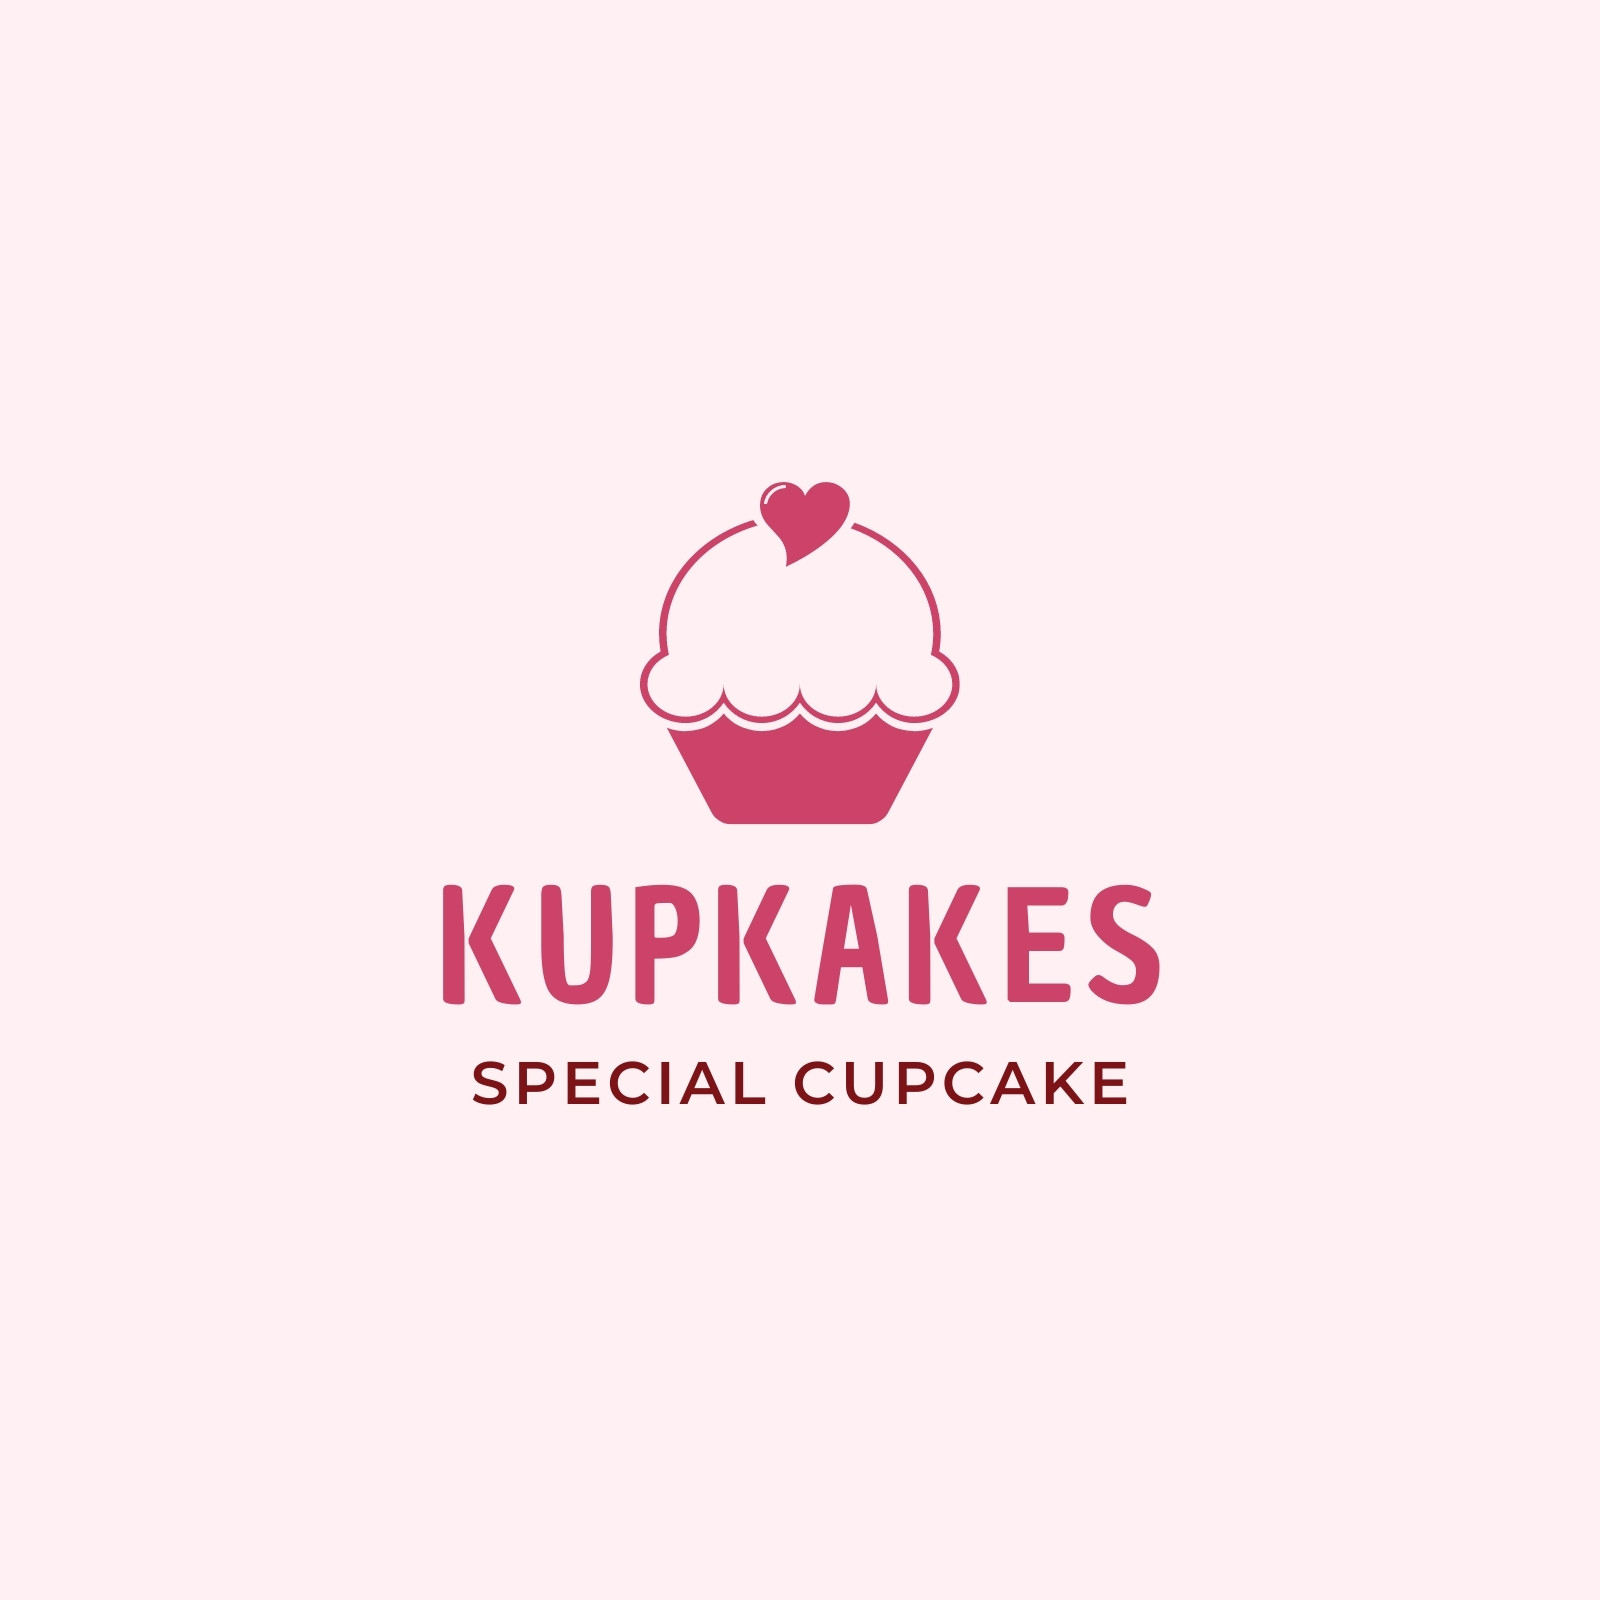 Cakeshop Cupcake Projects :: Photos, videos, logos, illustrations and  branding :: Behance